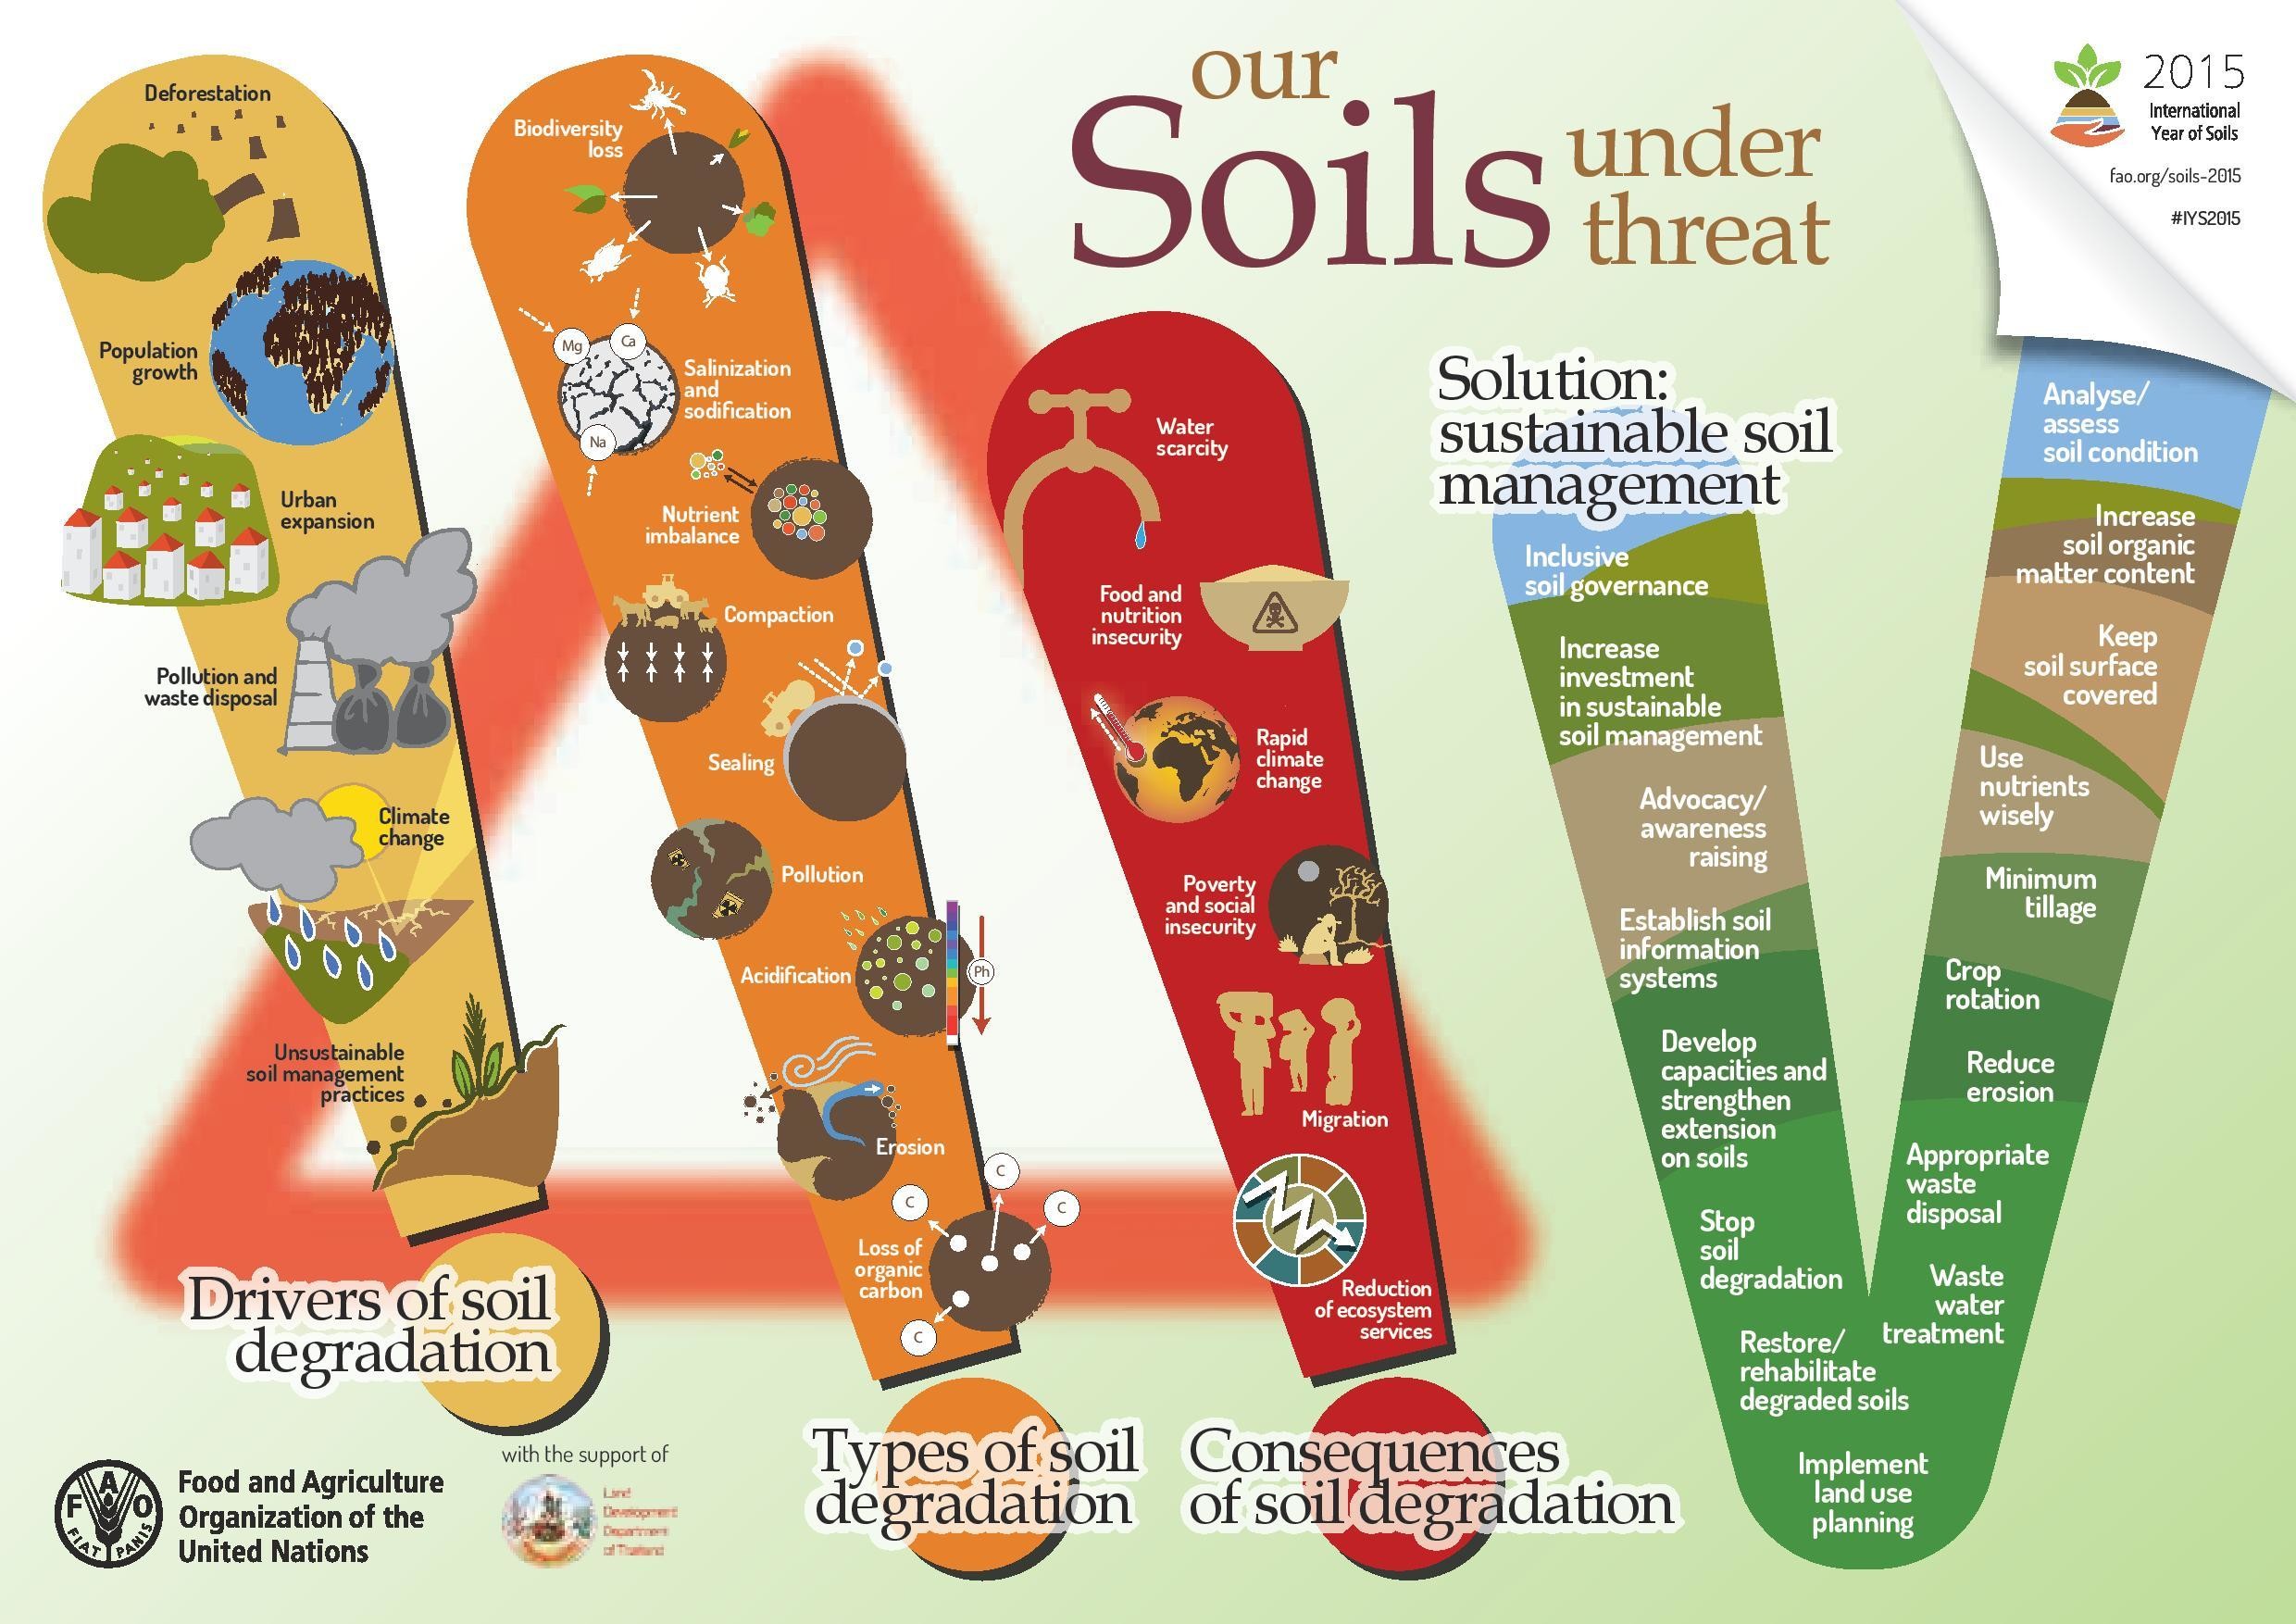 Causes and consequences of soil loss